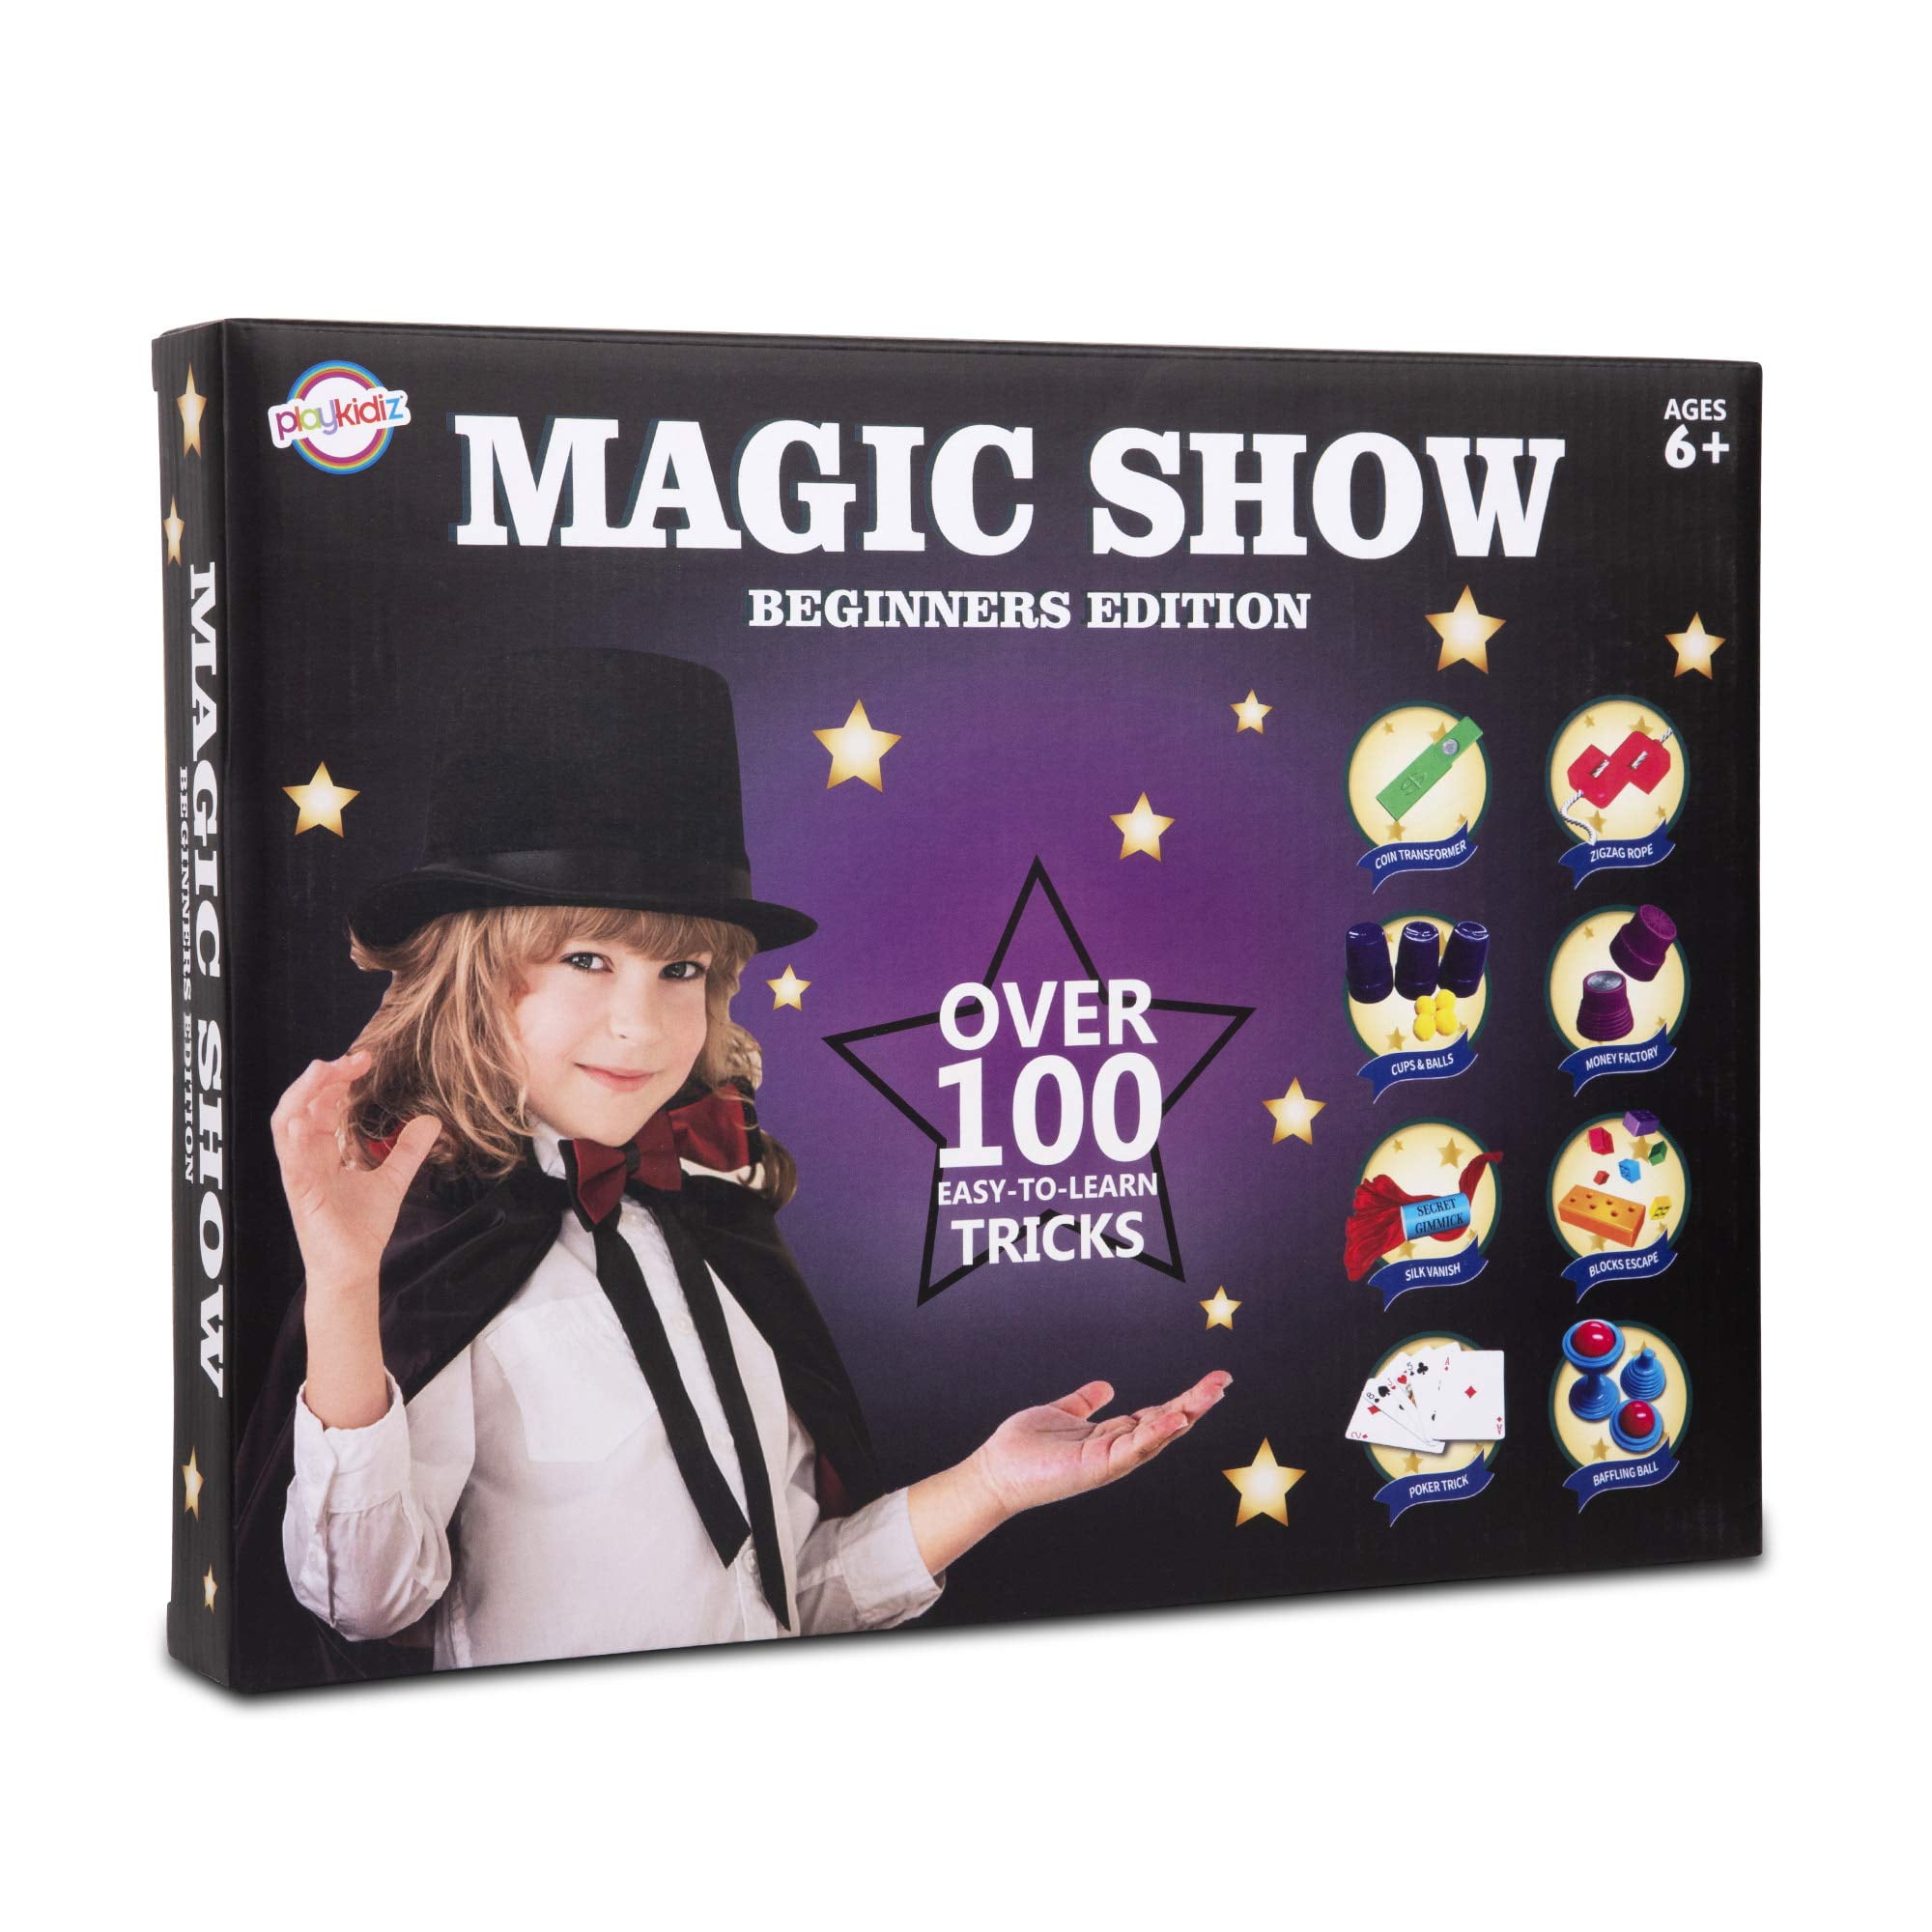 Children's Entertainer Comedy Magic Trick Prop Colour Changing Wand NEW 